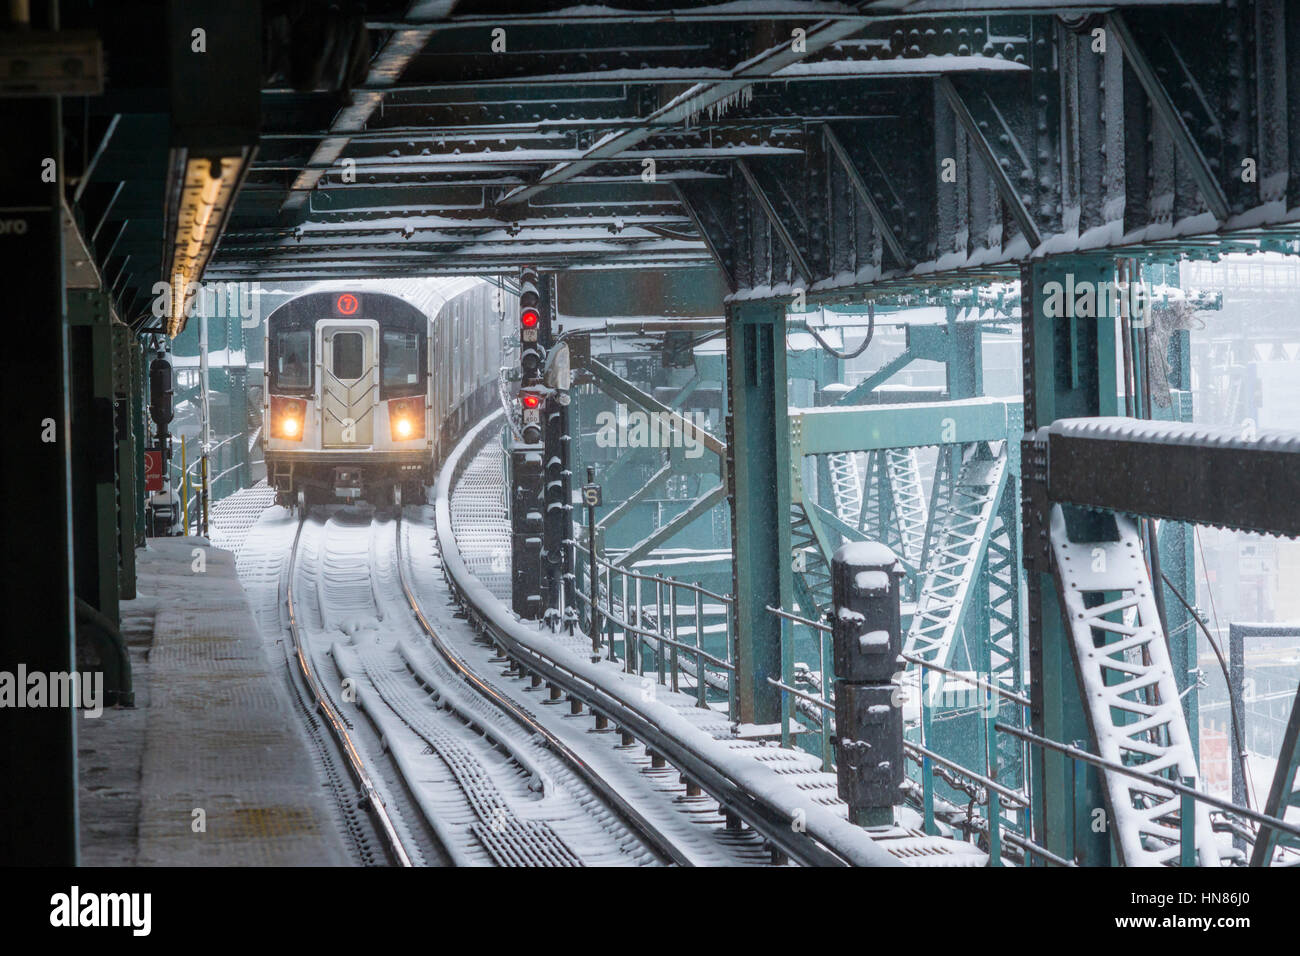 New York, USA. 09th Feb, 2017. A Flushing Line train arrives at the Queensboro Plaza station in New York during the city's first major winter storm of the season on Thursday, February 9, 2017. Meteorologists are forecasting between 8 and 14 inches of snow in the New York City region. The Metropolitan Transportation Authority has had no major delays and the trains continue to run.  Credit: Richard Levine/Alamy Live News Stock Photo